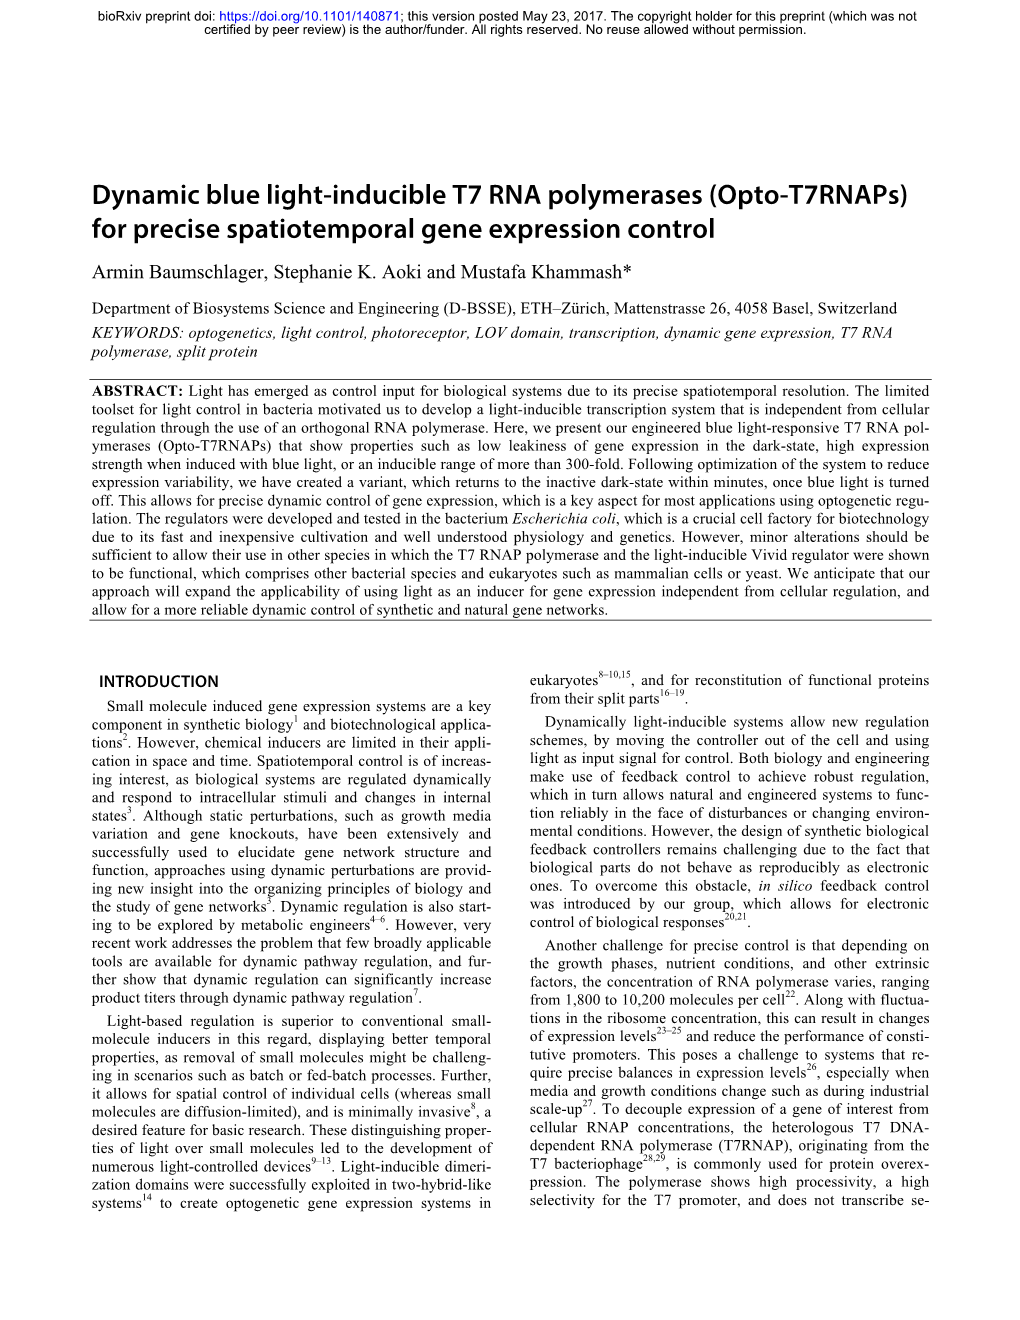 Dynamic Blue Light-Inducible T7 RNA Polymerases (Opto-T7rnaps) for Precise Spatiotemporal Gene Expression Control Armin Baumschlager, Stephanie K